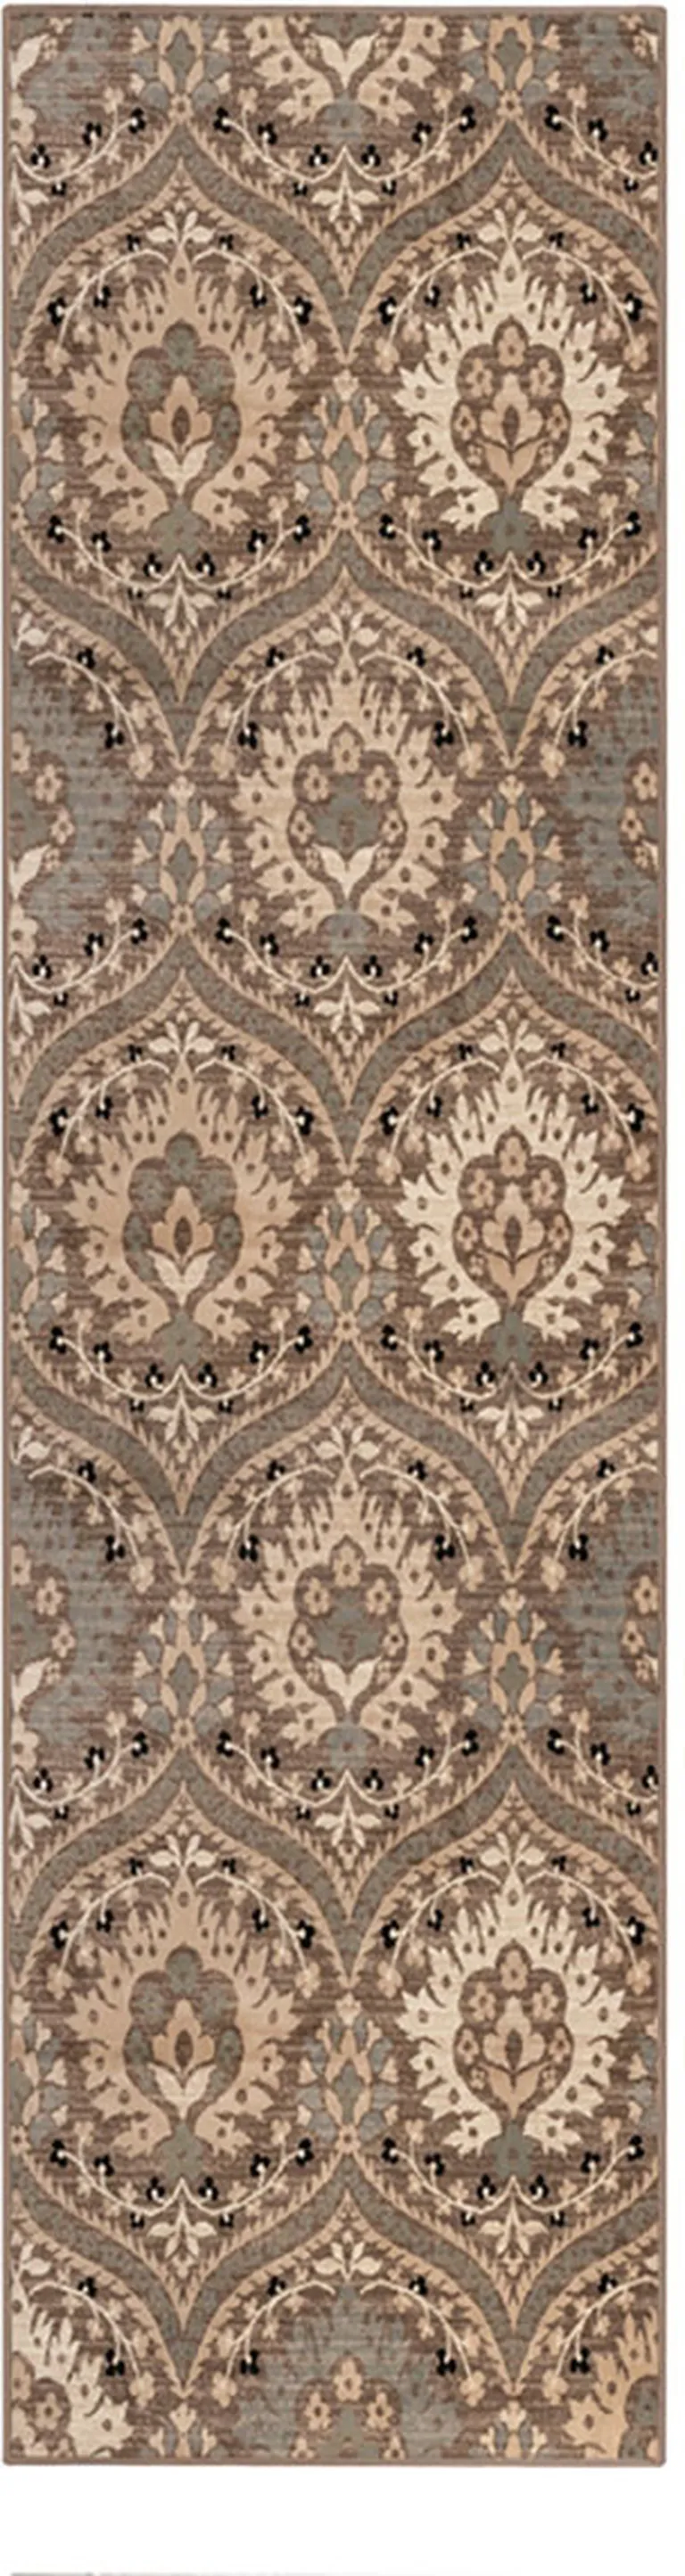 10' Ivory Beige And Light Blue Floral Stain Resistant Runner Rug Photo 1